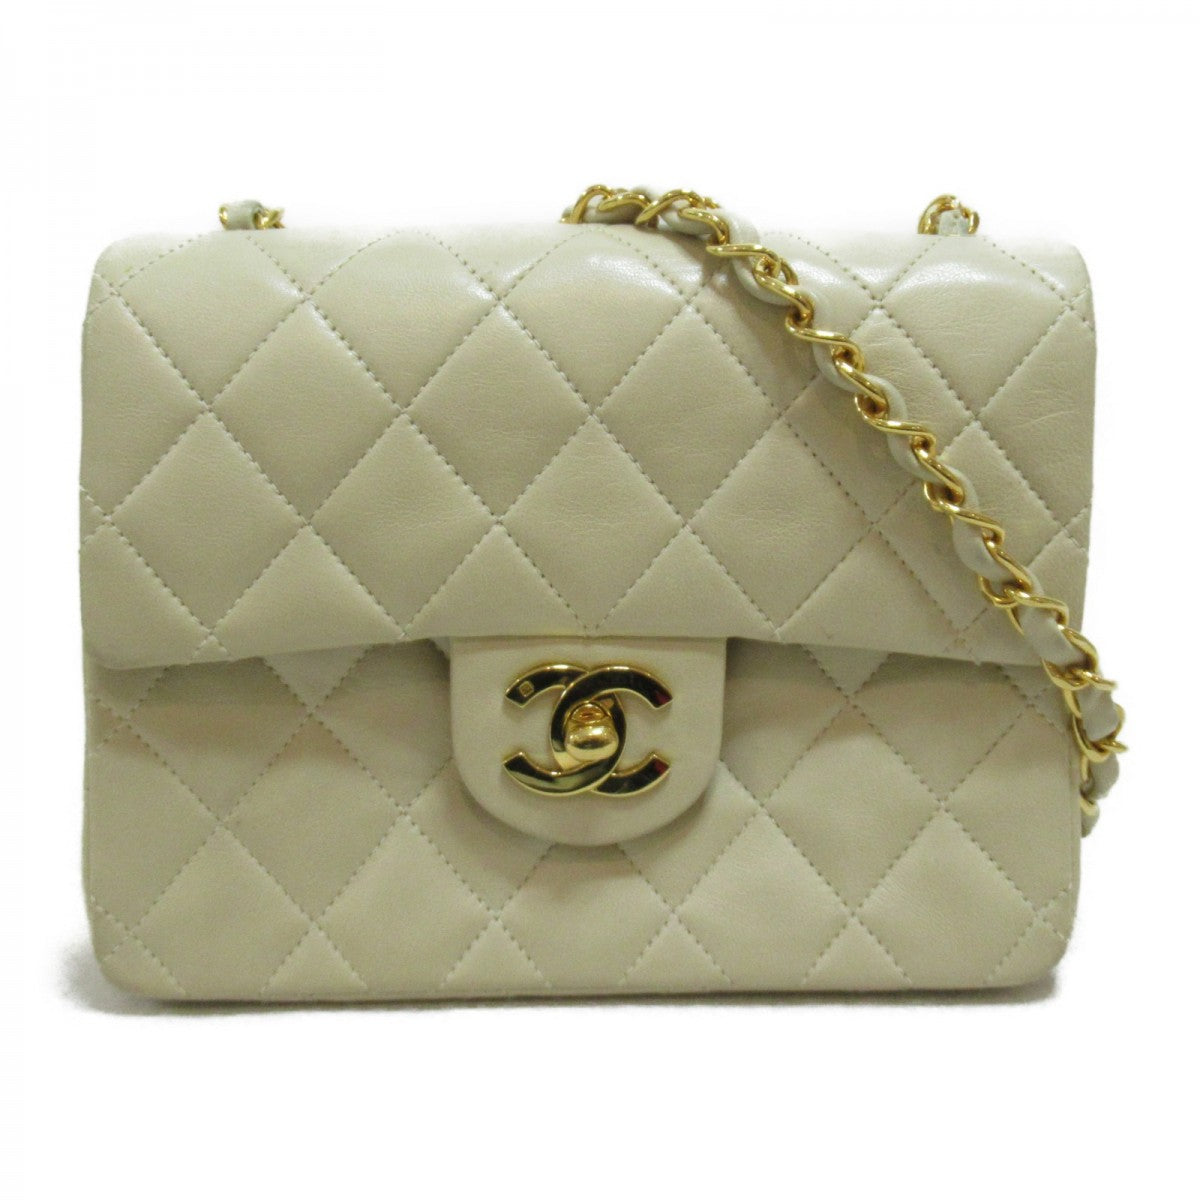 CC Quilted Leather Single Mini Flap Bag